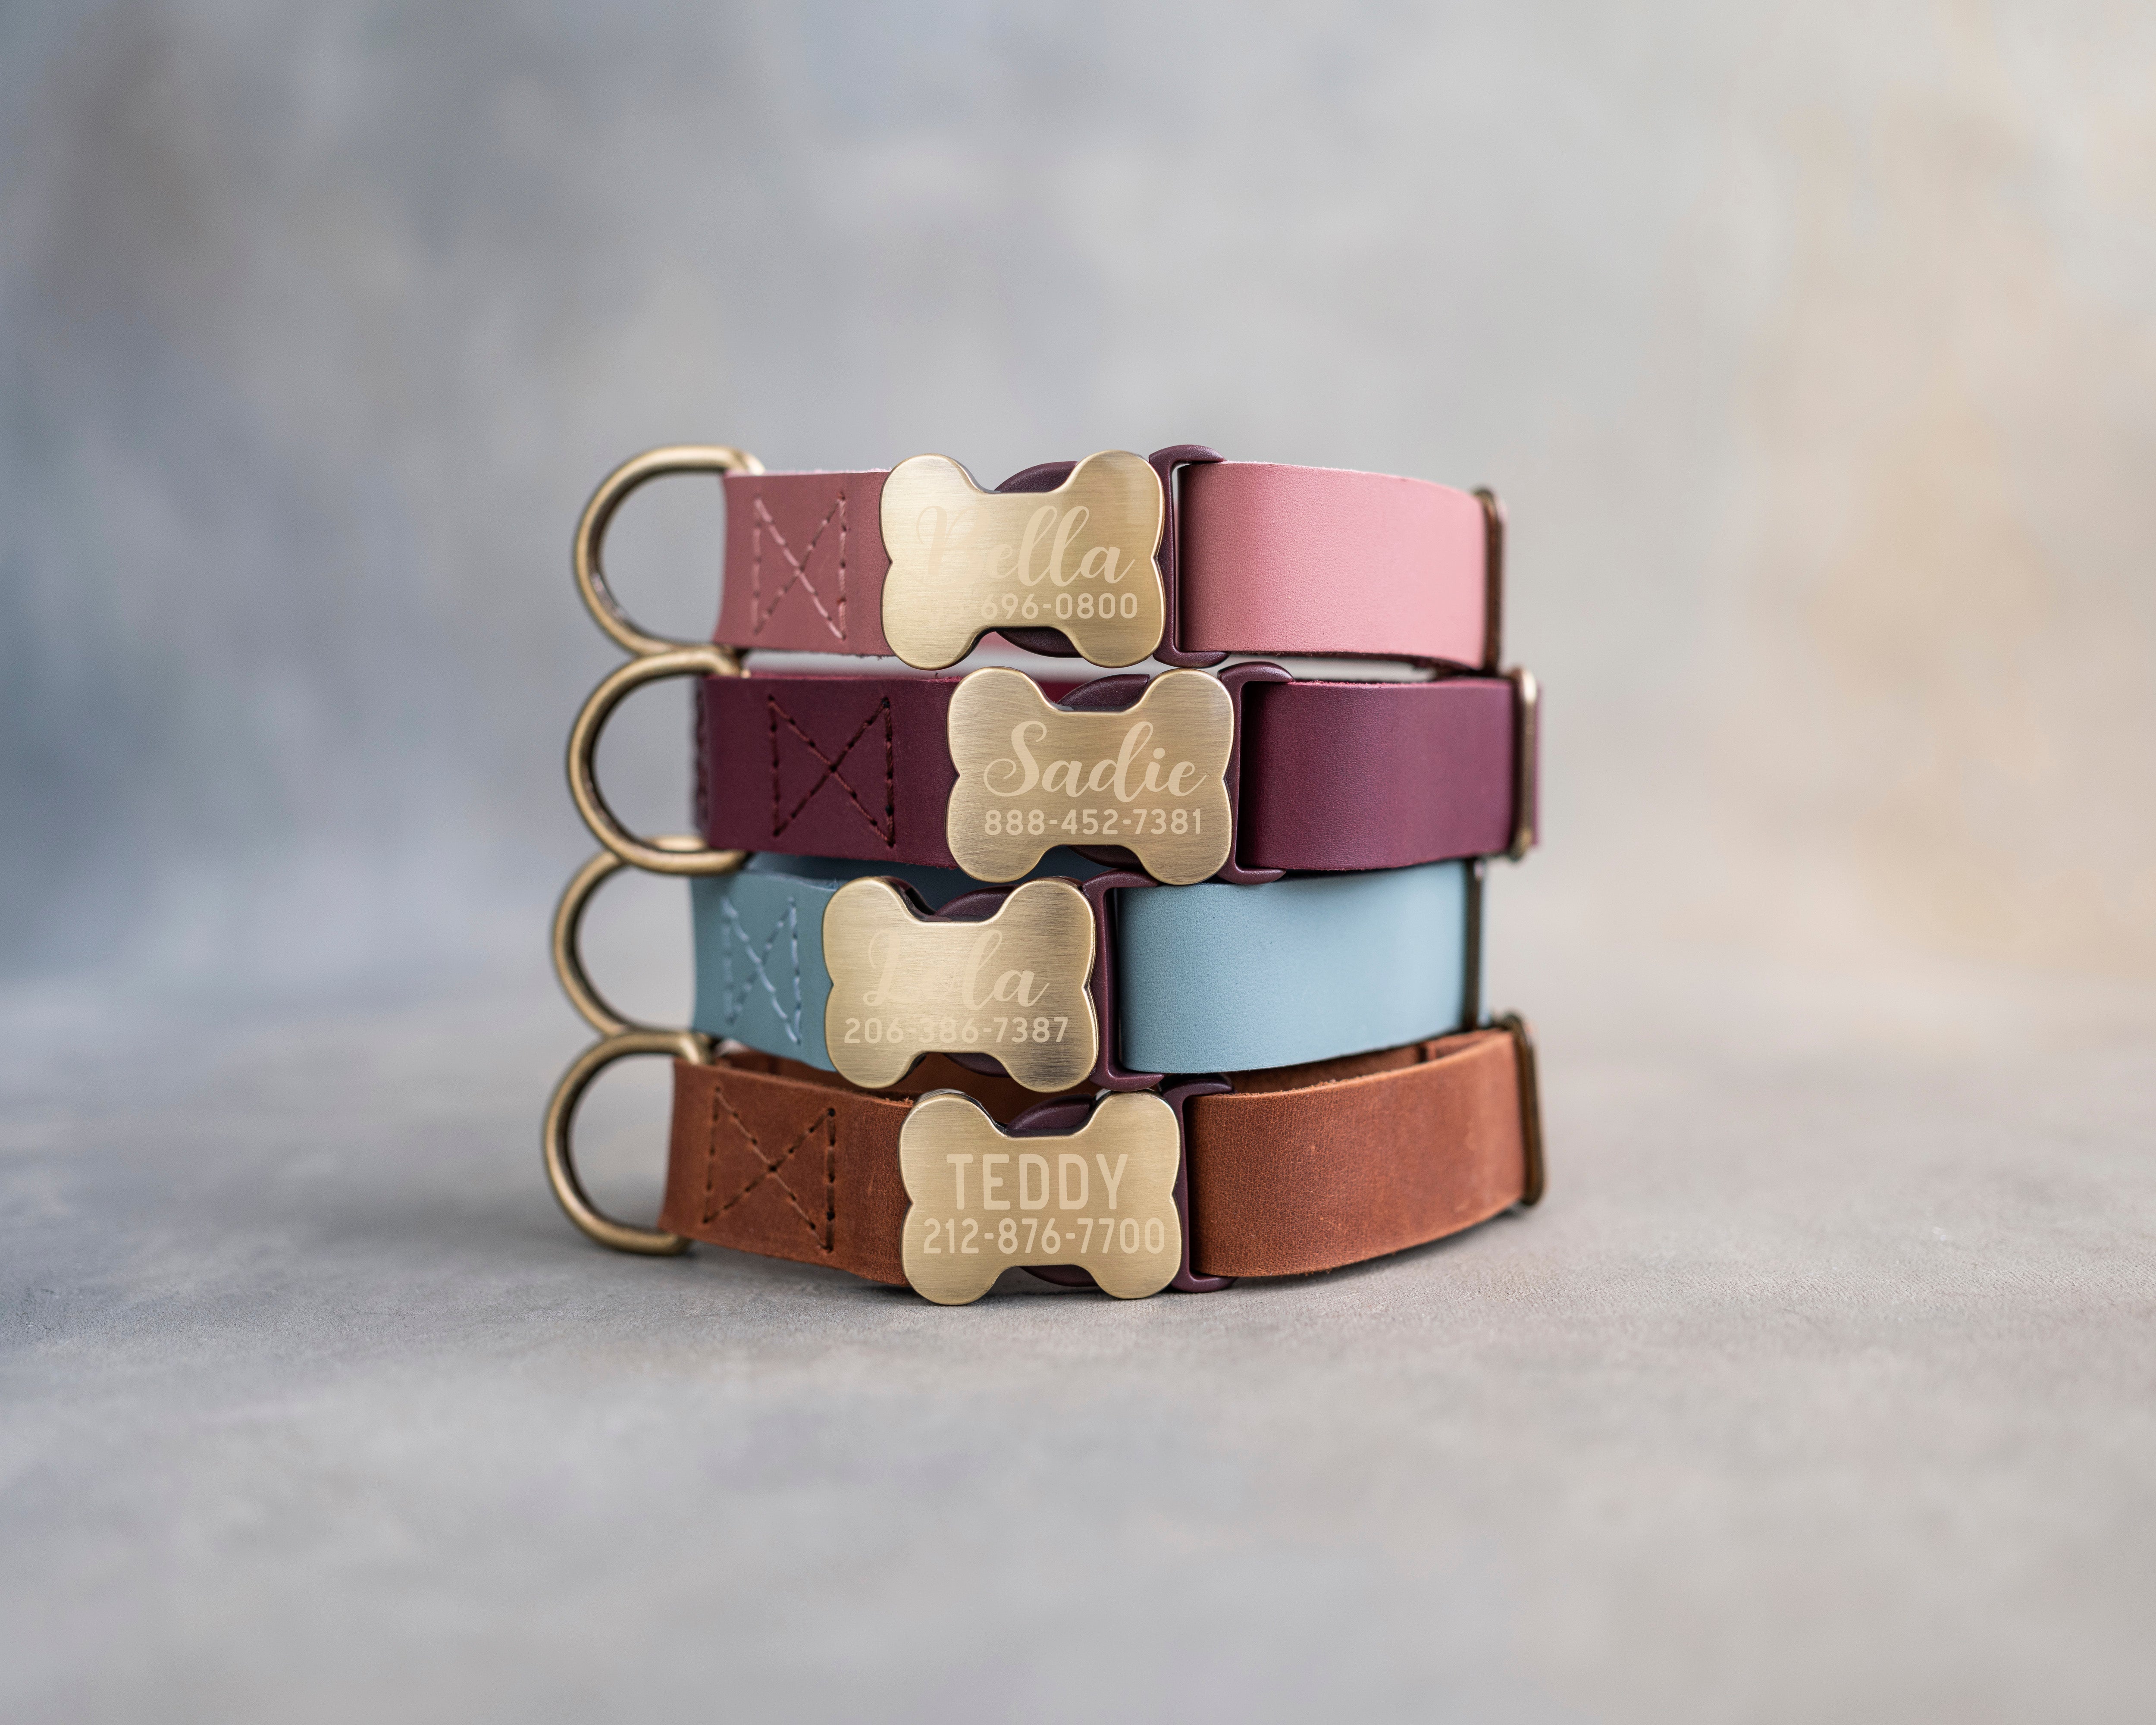 Personalized leather dog collar for smaller dogs